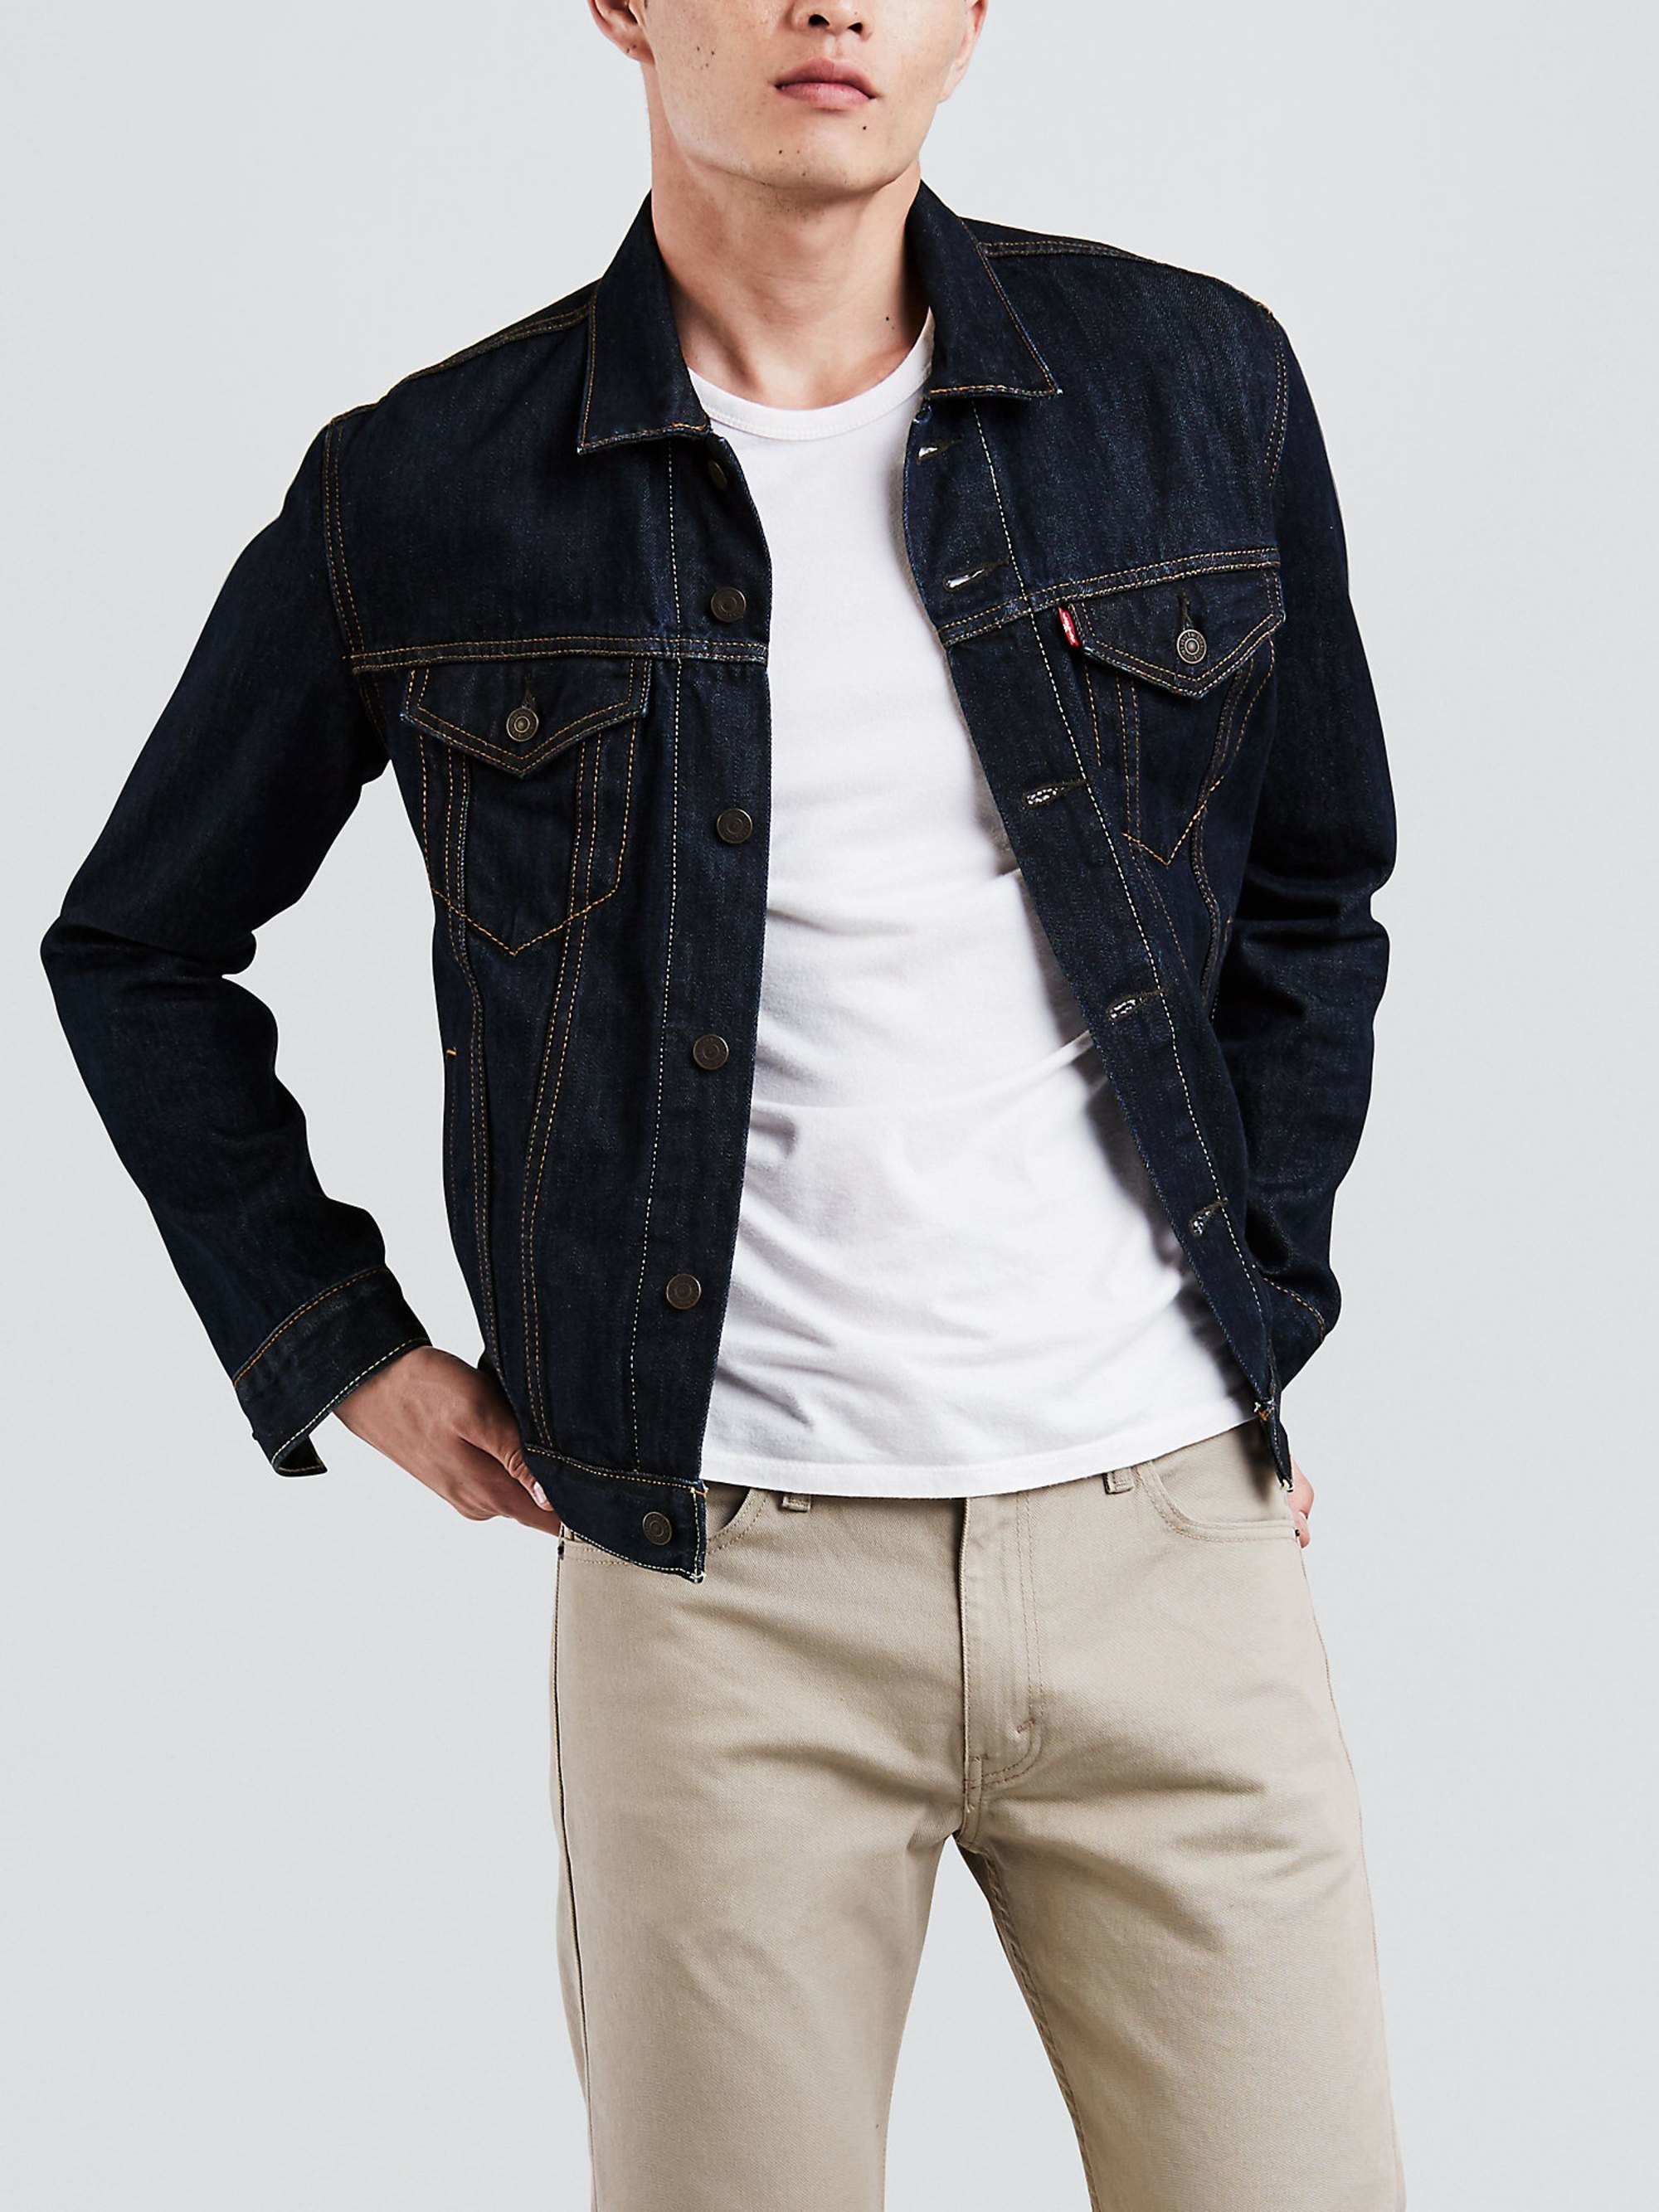 person wearing a dark wash denim jacket with a white t-shirt and khaki pants